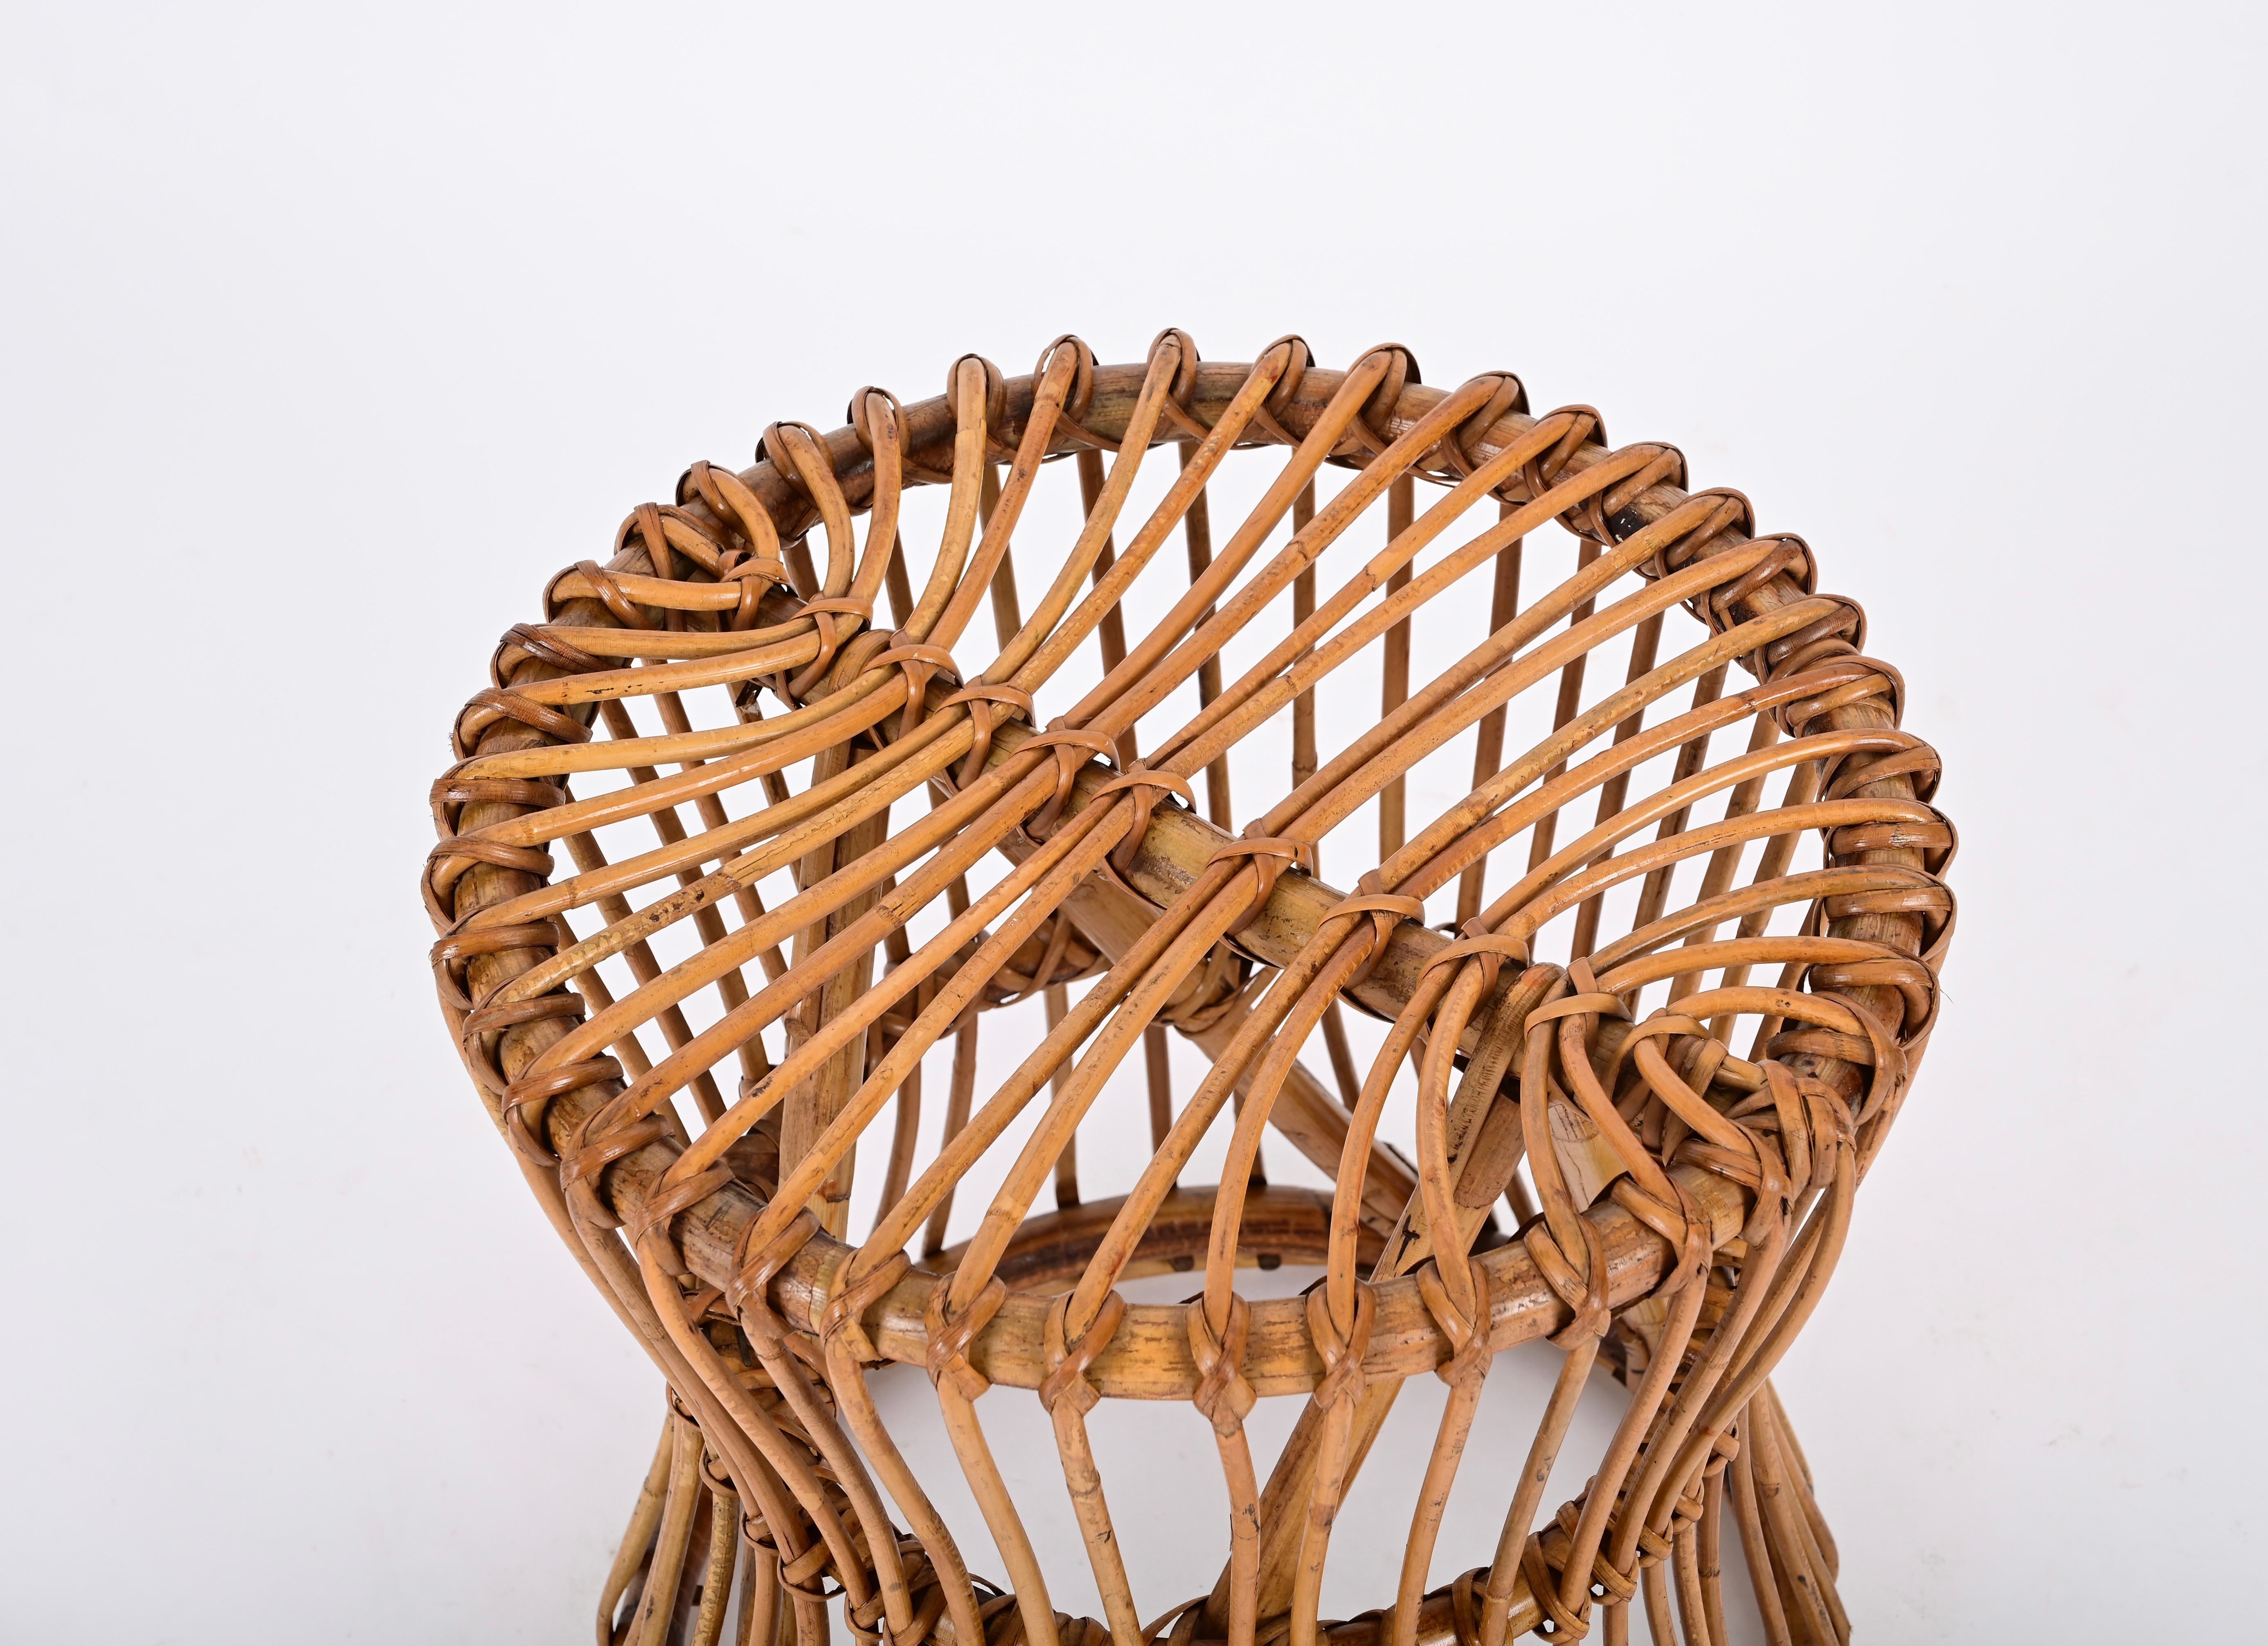 Hand-Crafted Midcentury French Riviera Pouf Stool in Rattan and Woven Wicker, Italy, 1960s For Sale